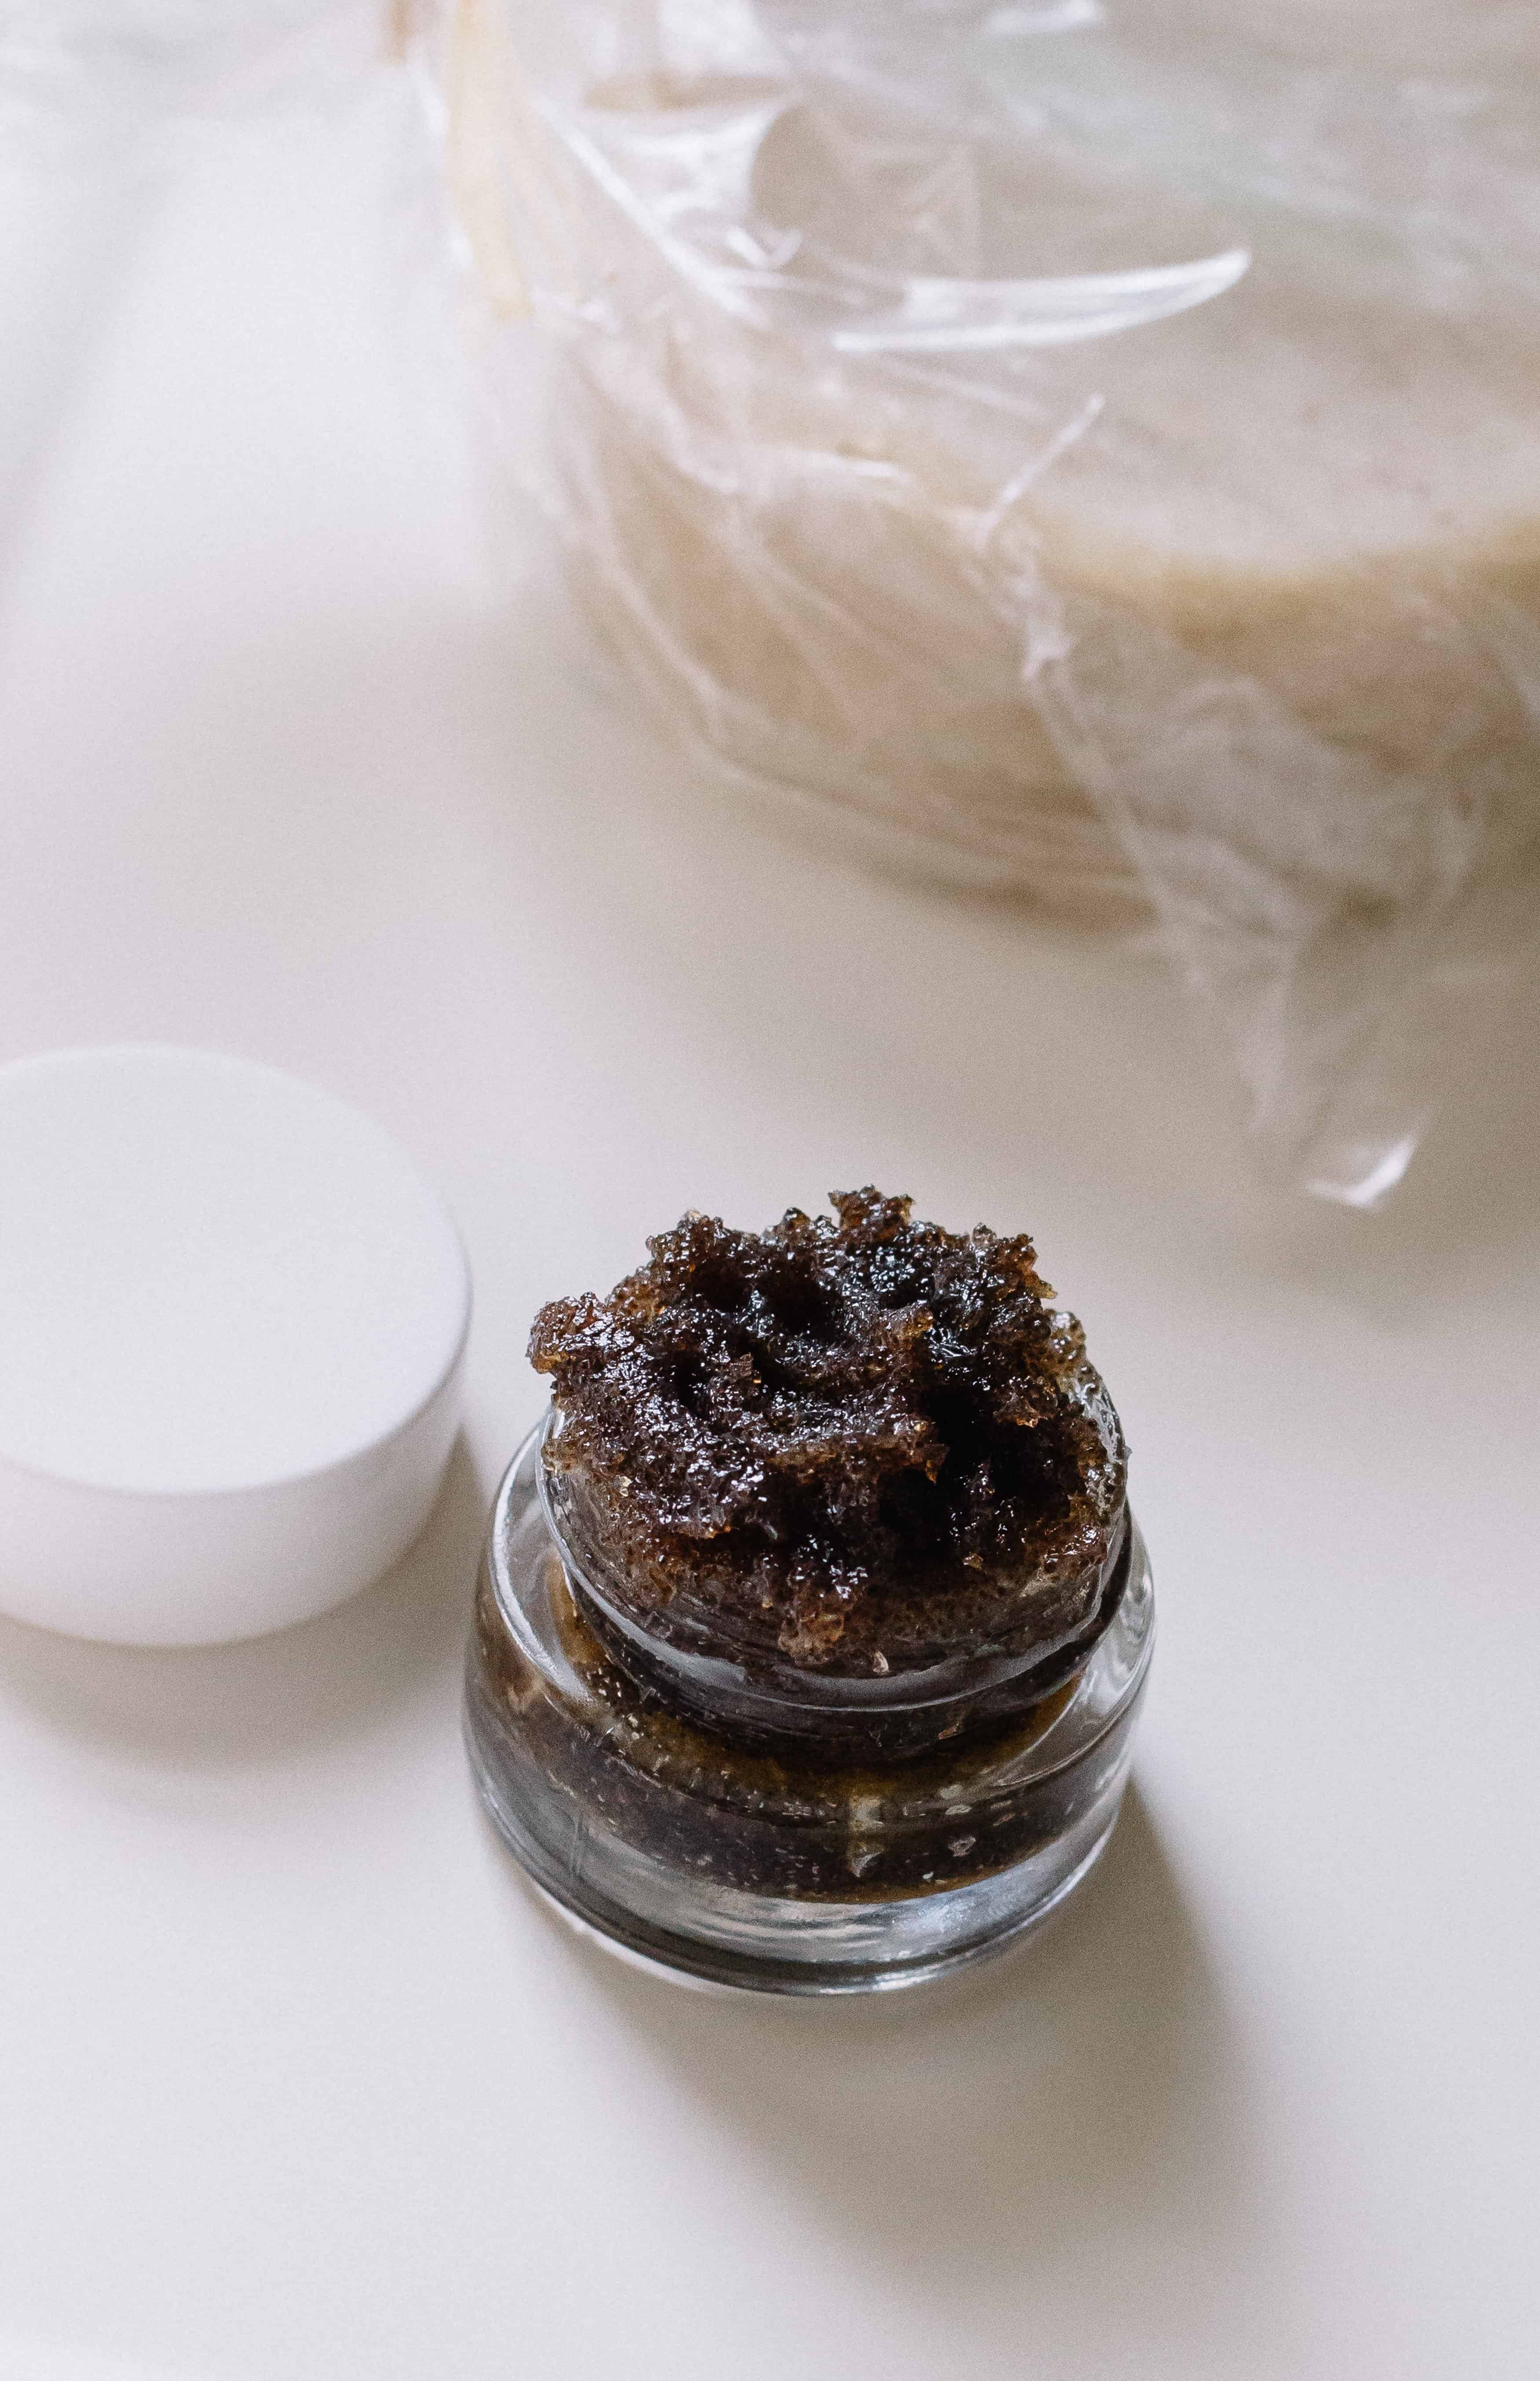 A 5-minute diy cocoa lip sugar scrub that is so easy to make. It’s the perfect exfoliator for dry lips this winter season being that chocolate is rich in antioxidants. (Click here for the homemade recipe!)